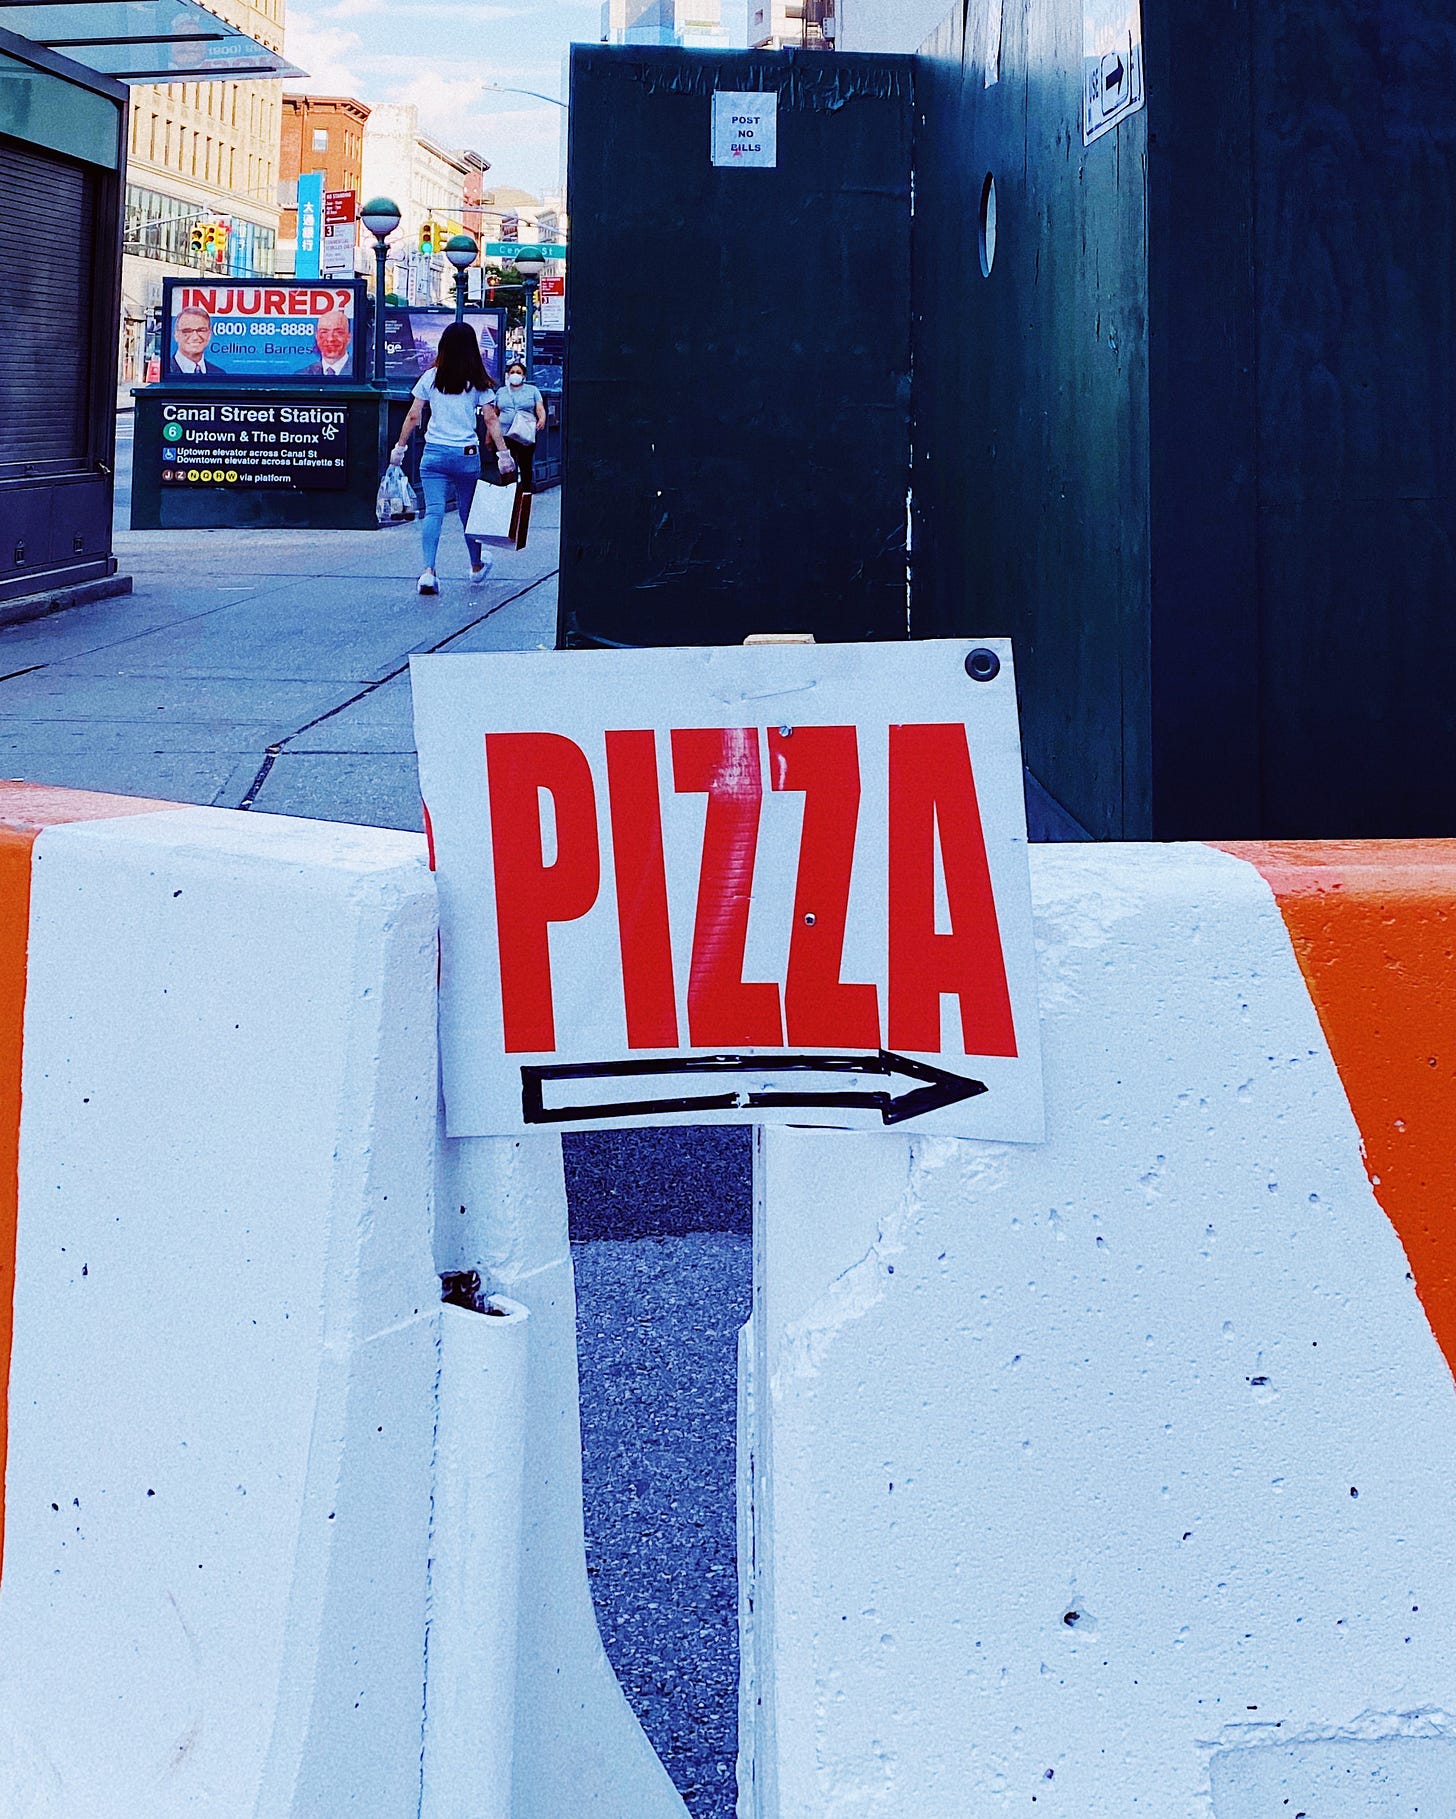 Pizza Sign in NYC